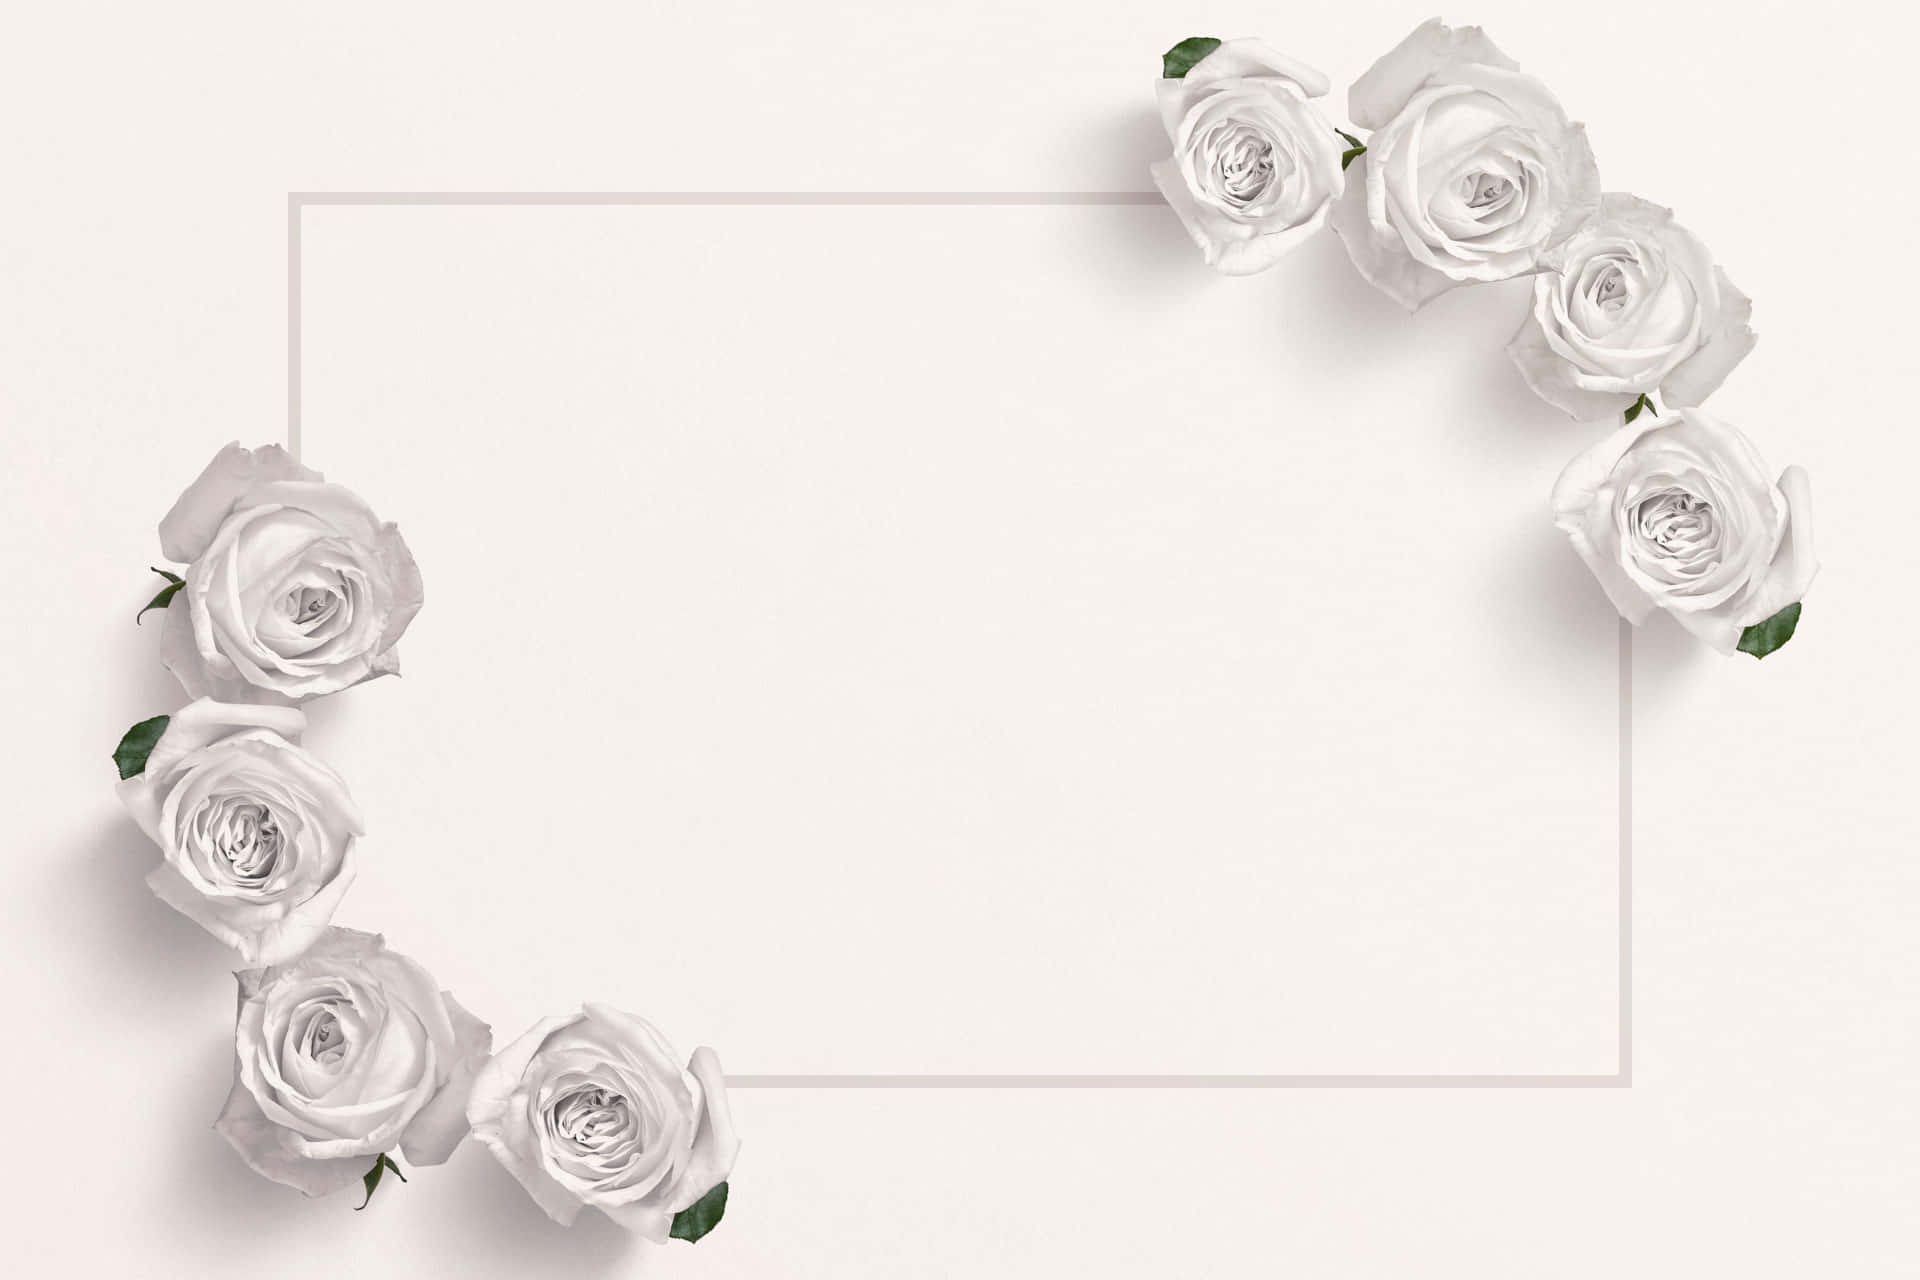 A delicate beauty--this white rose expresses grace and elegance.